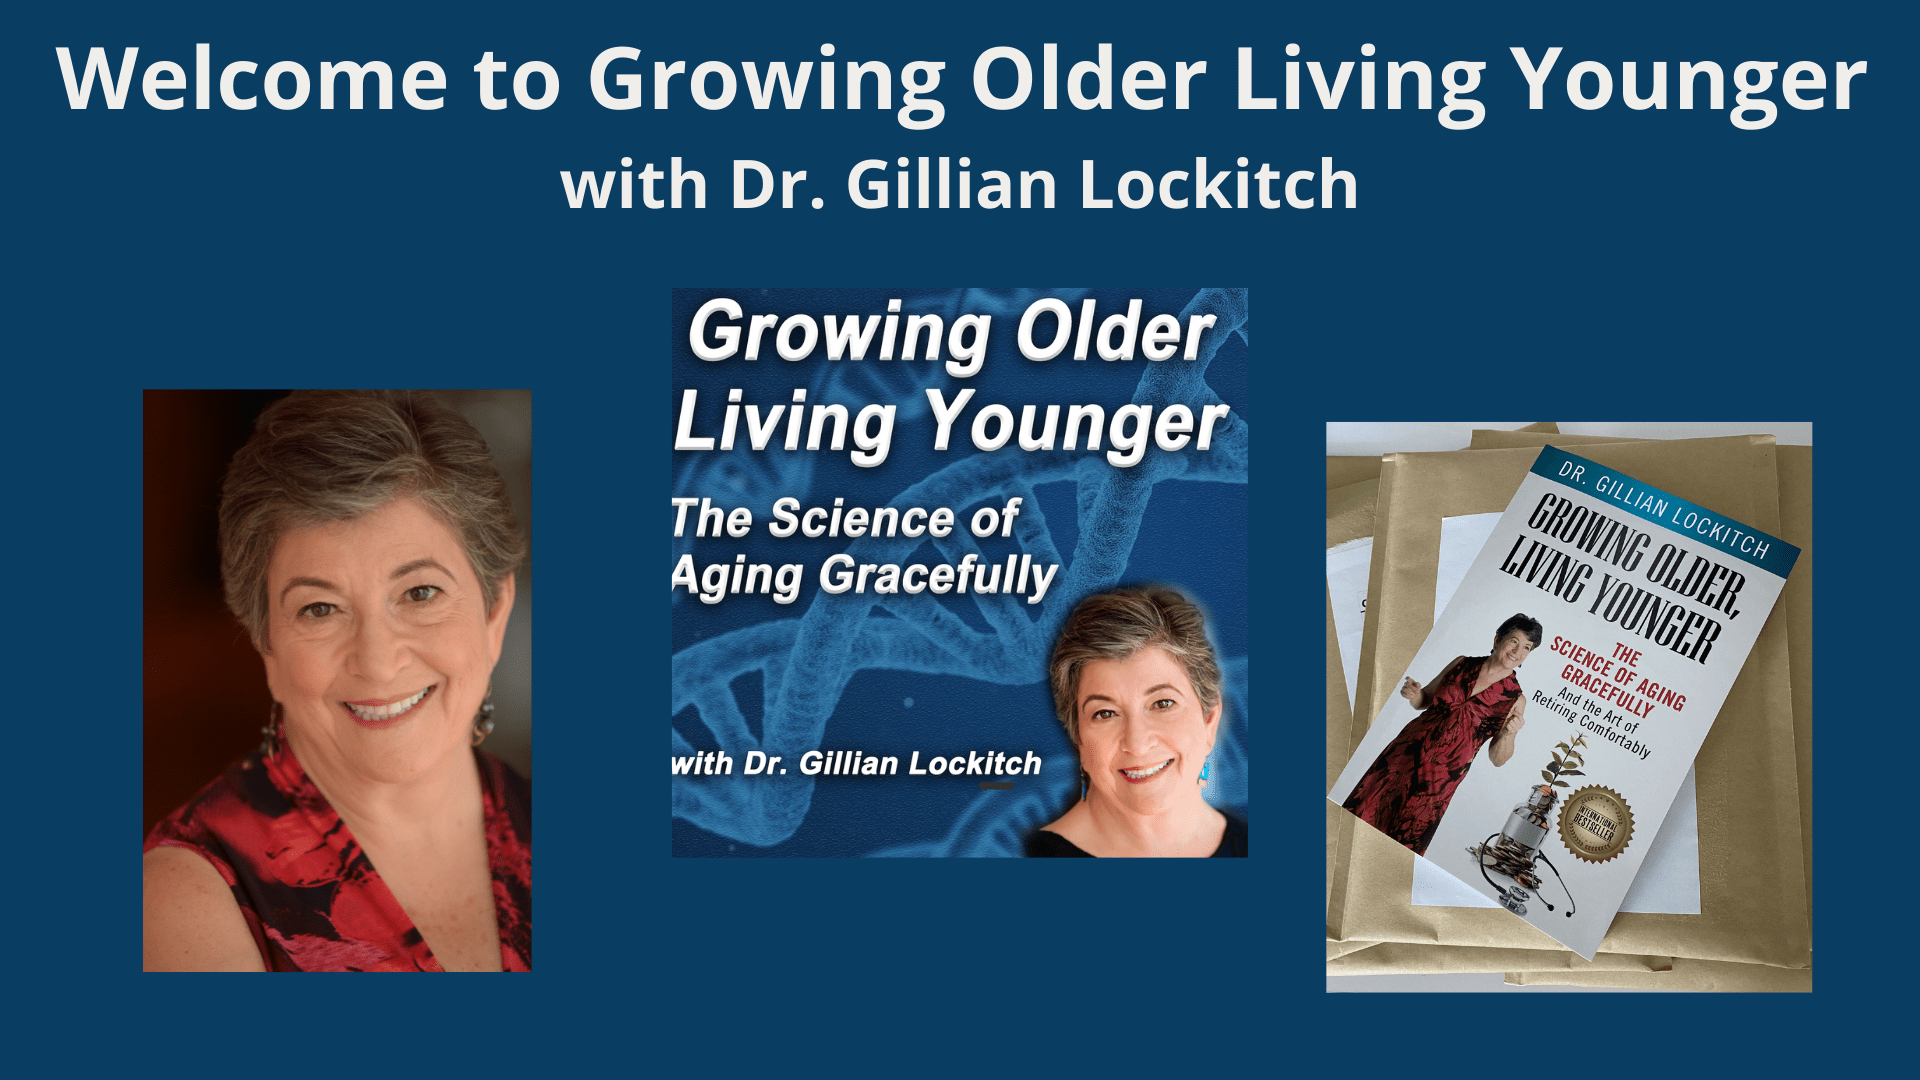 001 - Welcome to Growing Older Living Younger